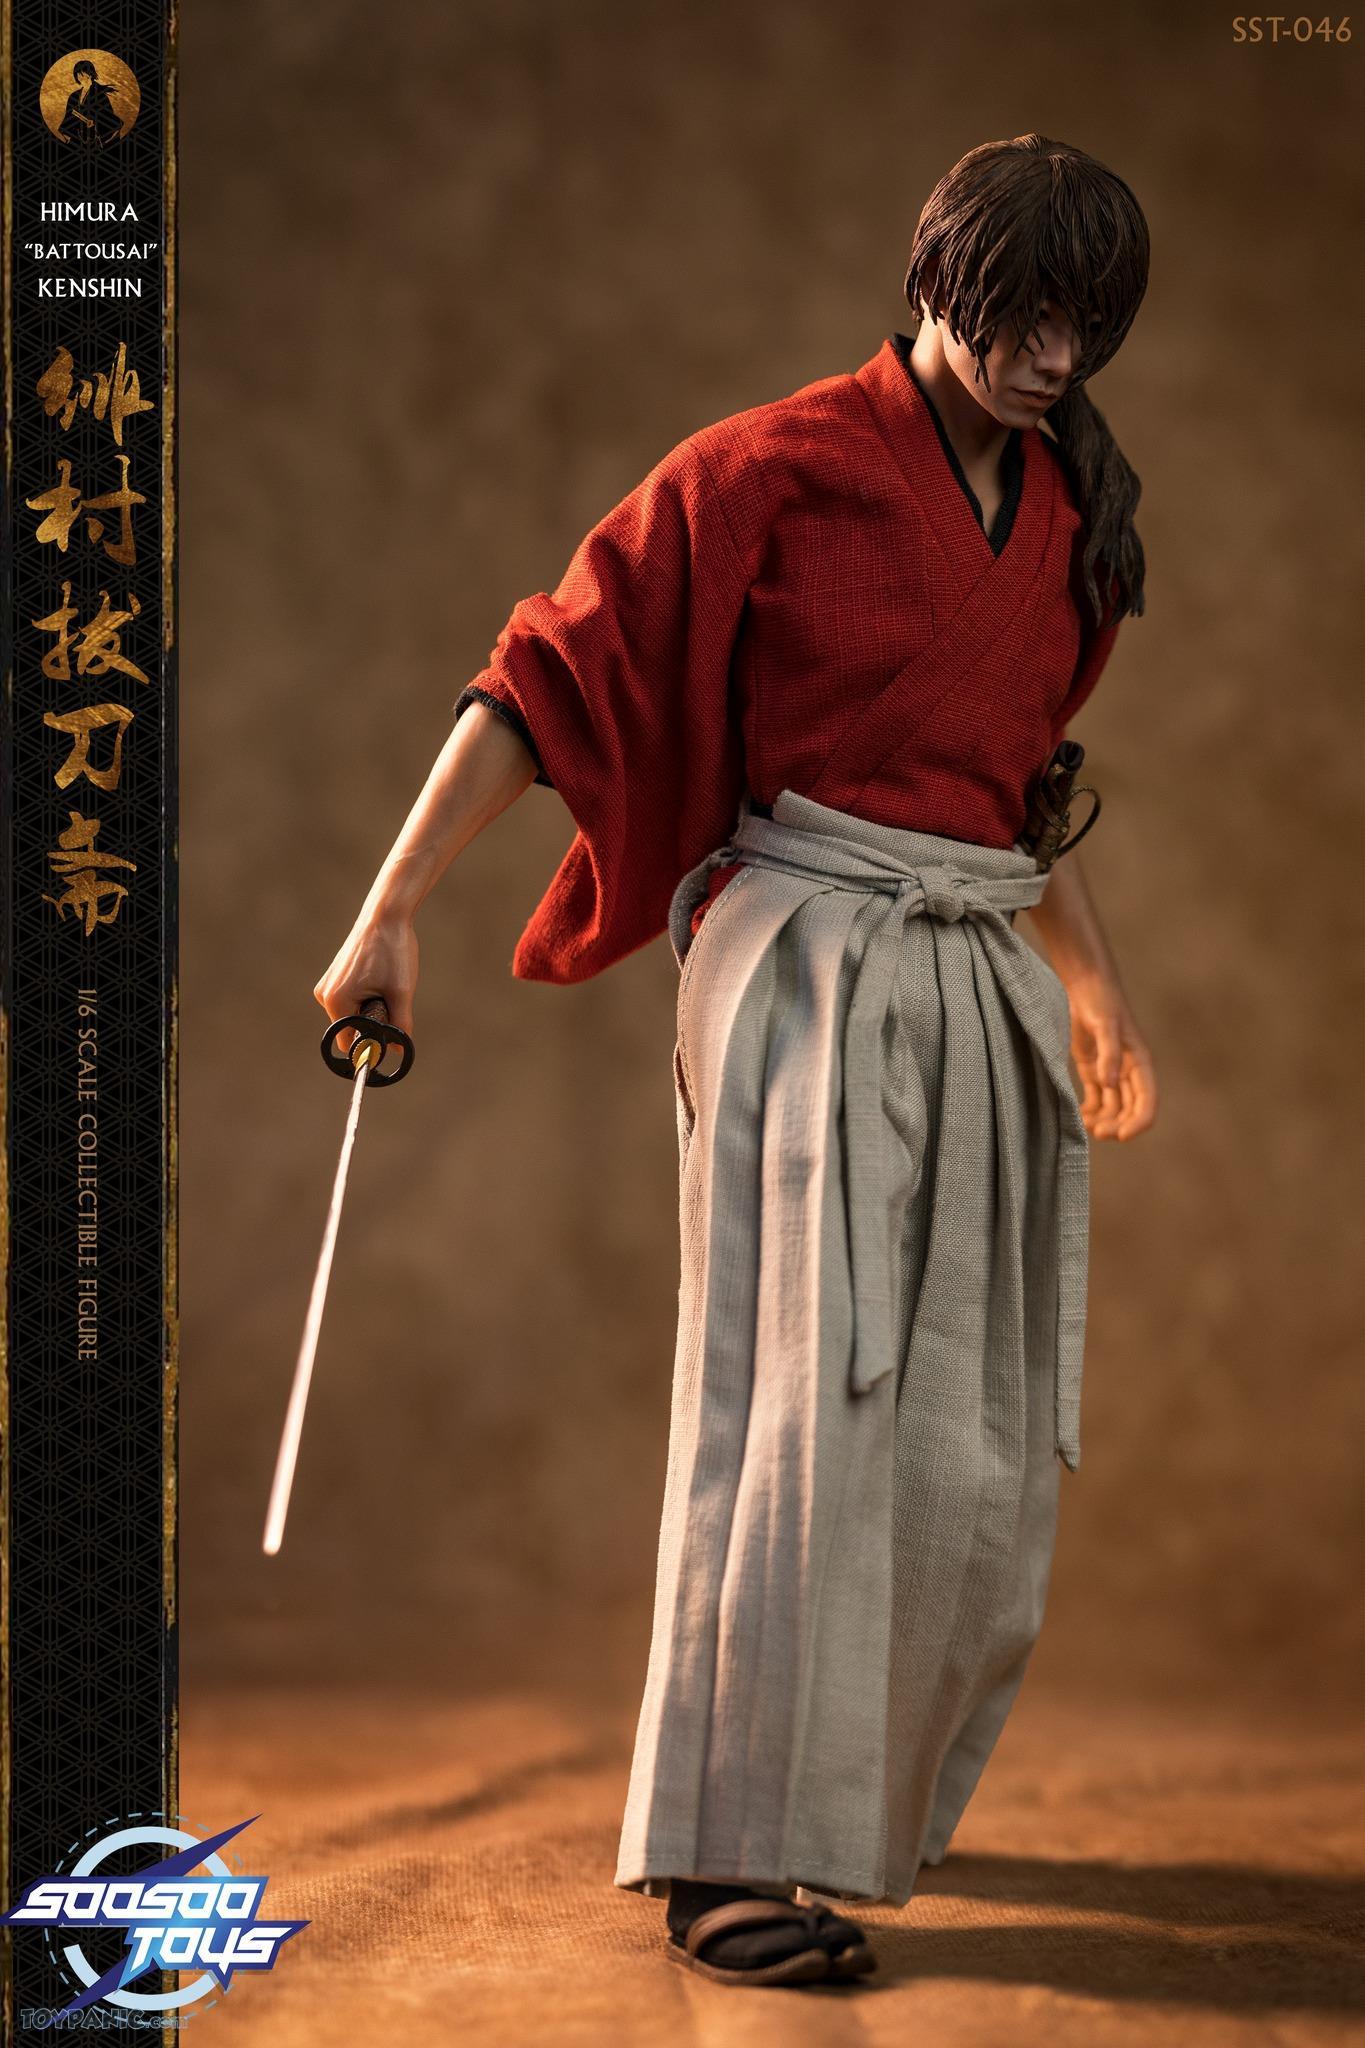 kenshin - NEW PRODUCT: 1/6 scale Rurouni Kenshin Collectible Figure from SooSooToys 712202251231PM_223060